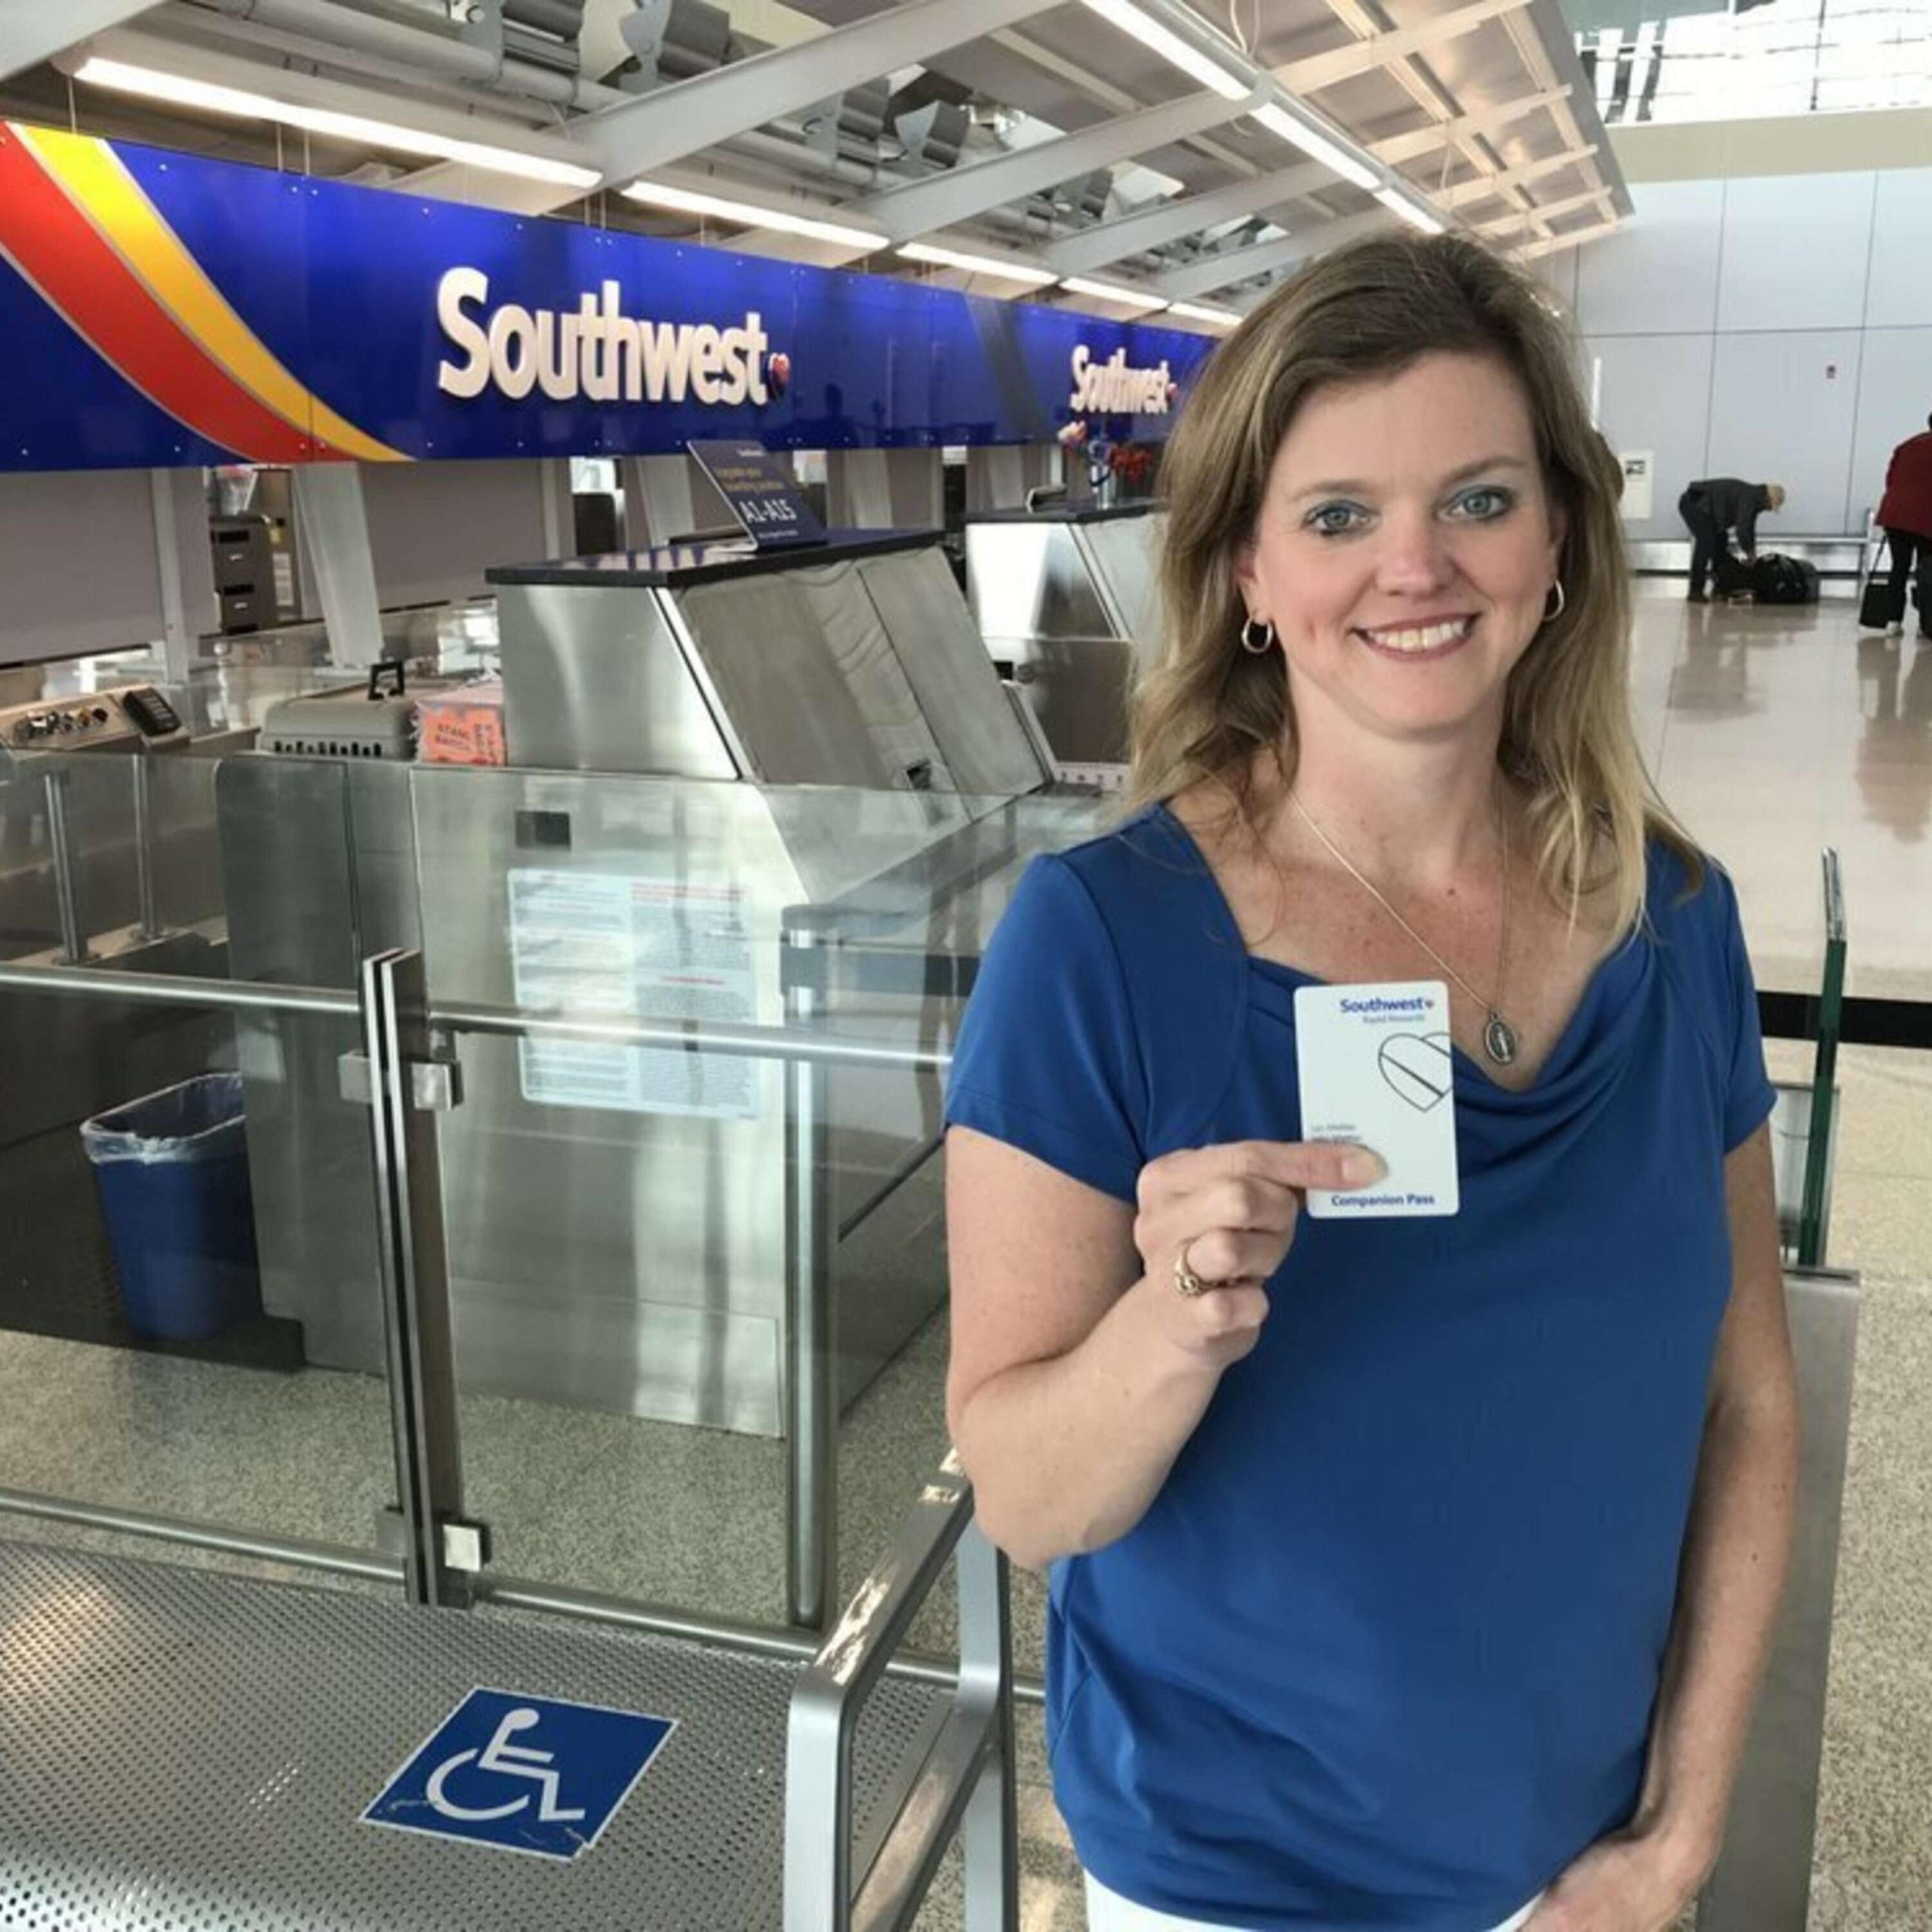 A woman is standing in front of an airport holding a ticket.